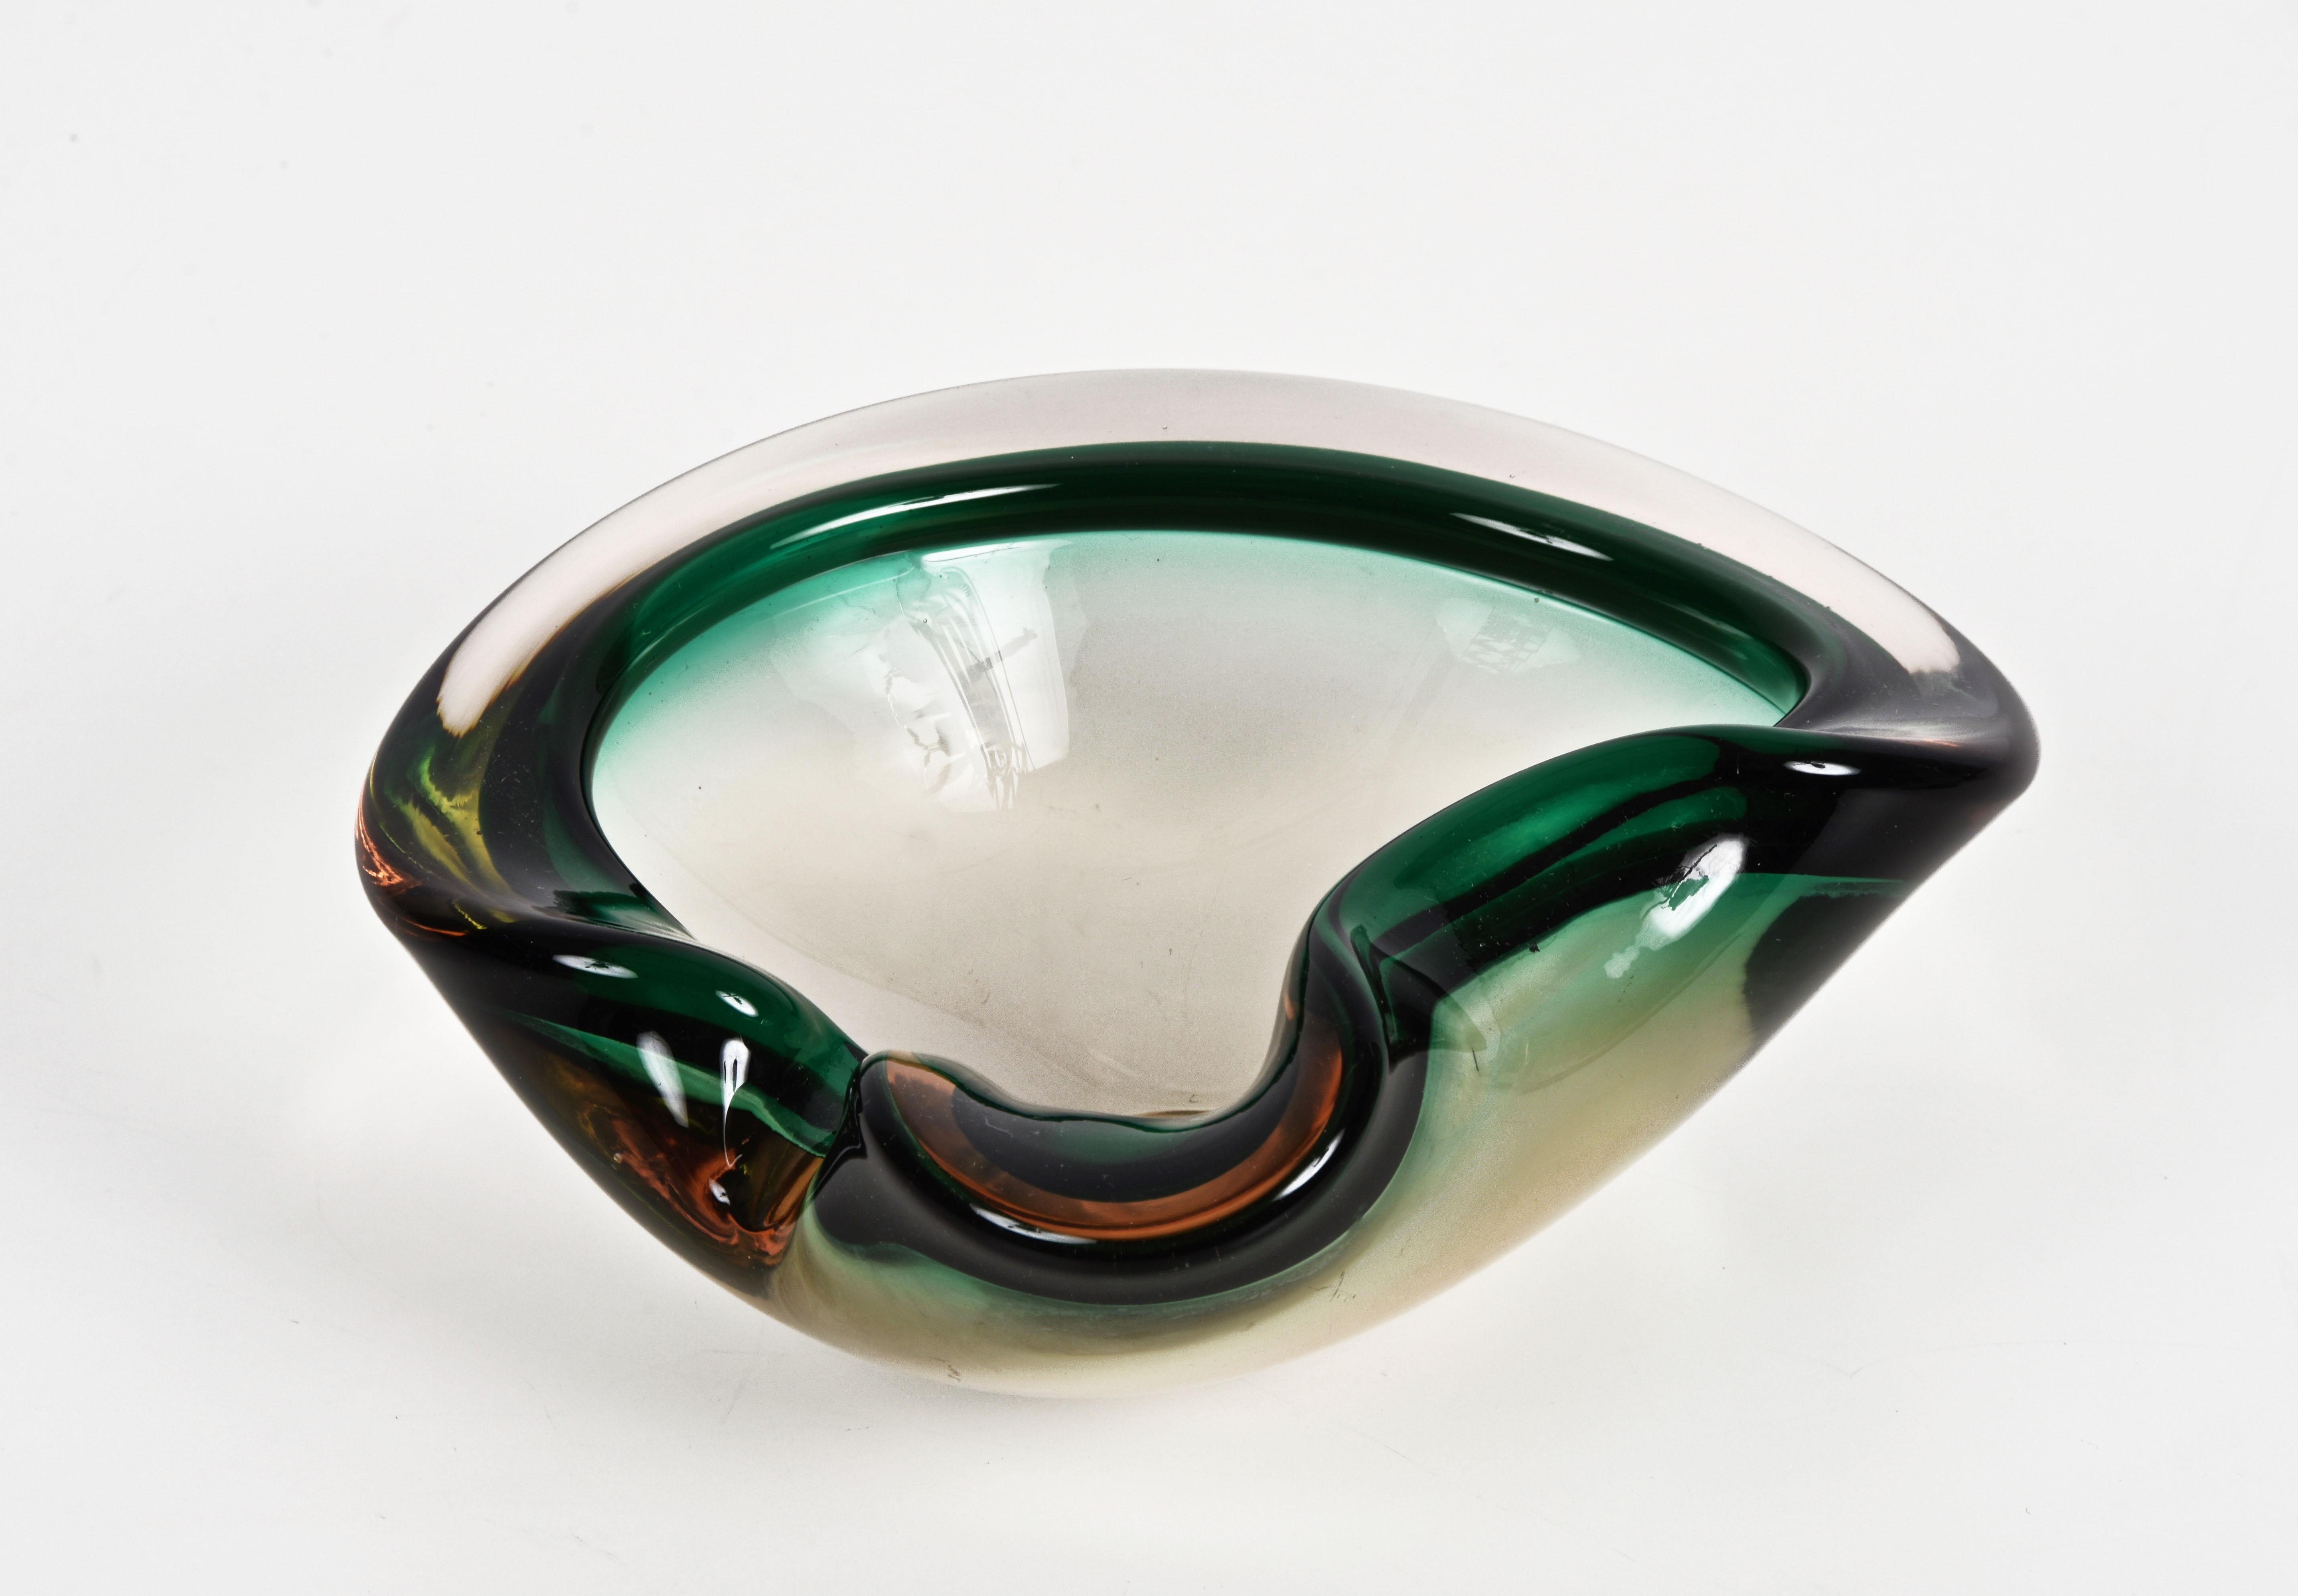 Magnificent heart-shaped, glass bowl or ashtray. Green, amber and crystal sommerso glass Murano, that was produced in Italy during the 1960s.

This wonderful piece is a perfect blend of sinuous lines and colors of the Murano glass due to the